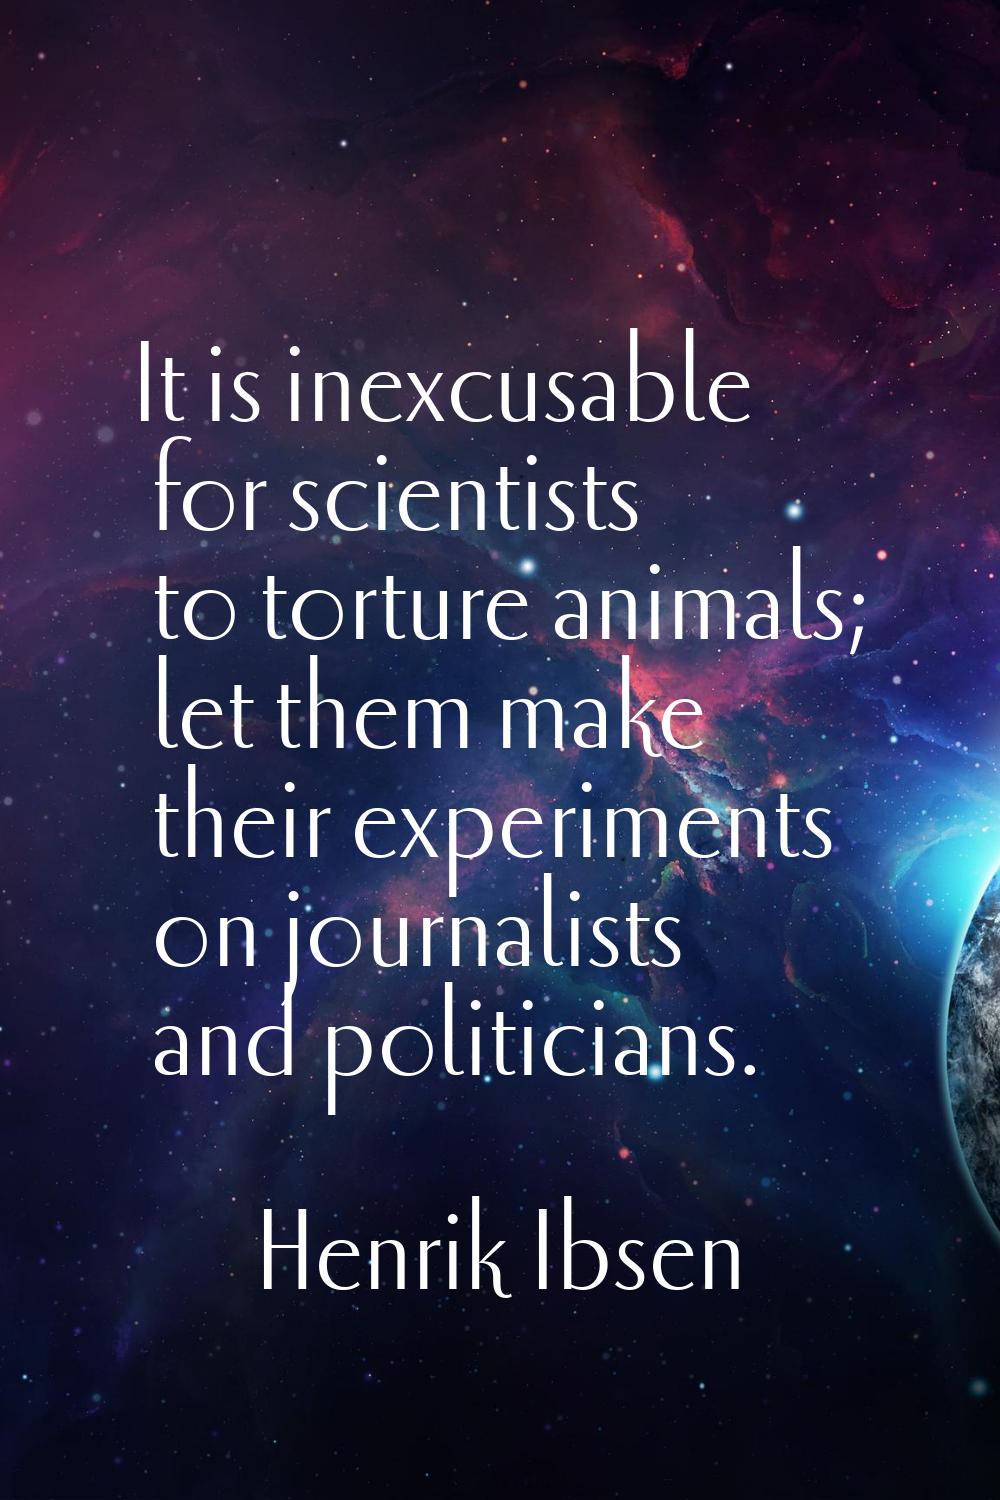 It is inexcusable for scientists to torture animals; let them make their experiments on journalists